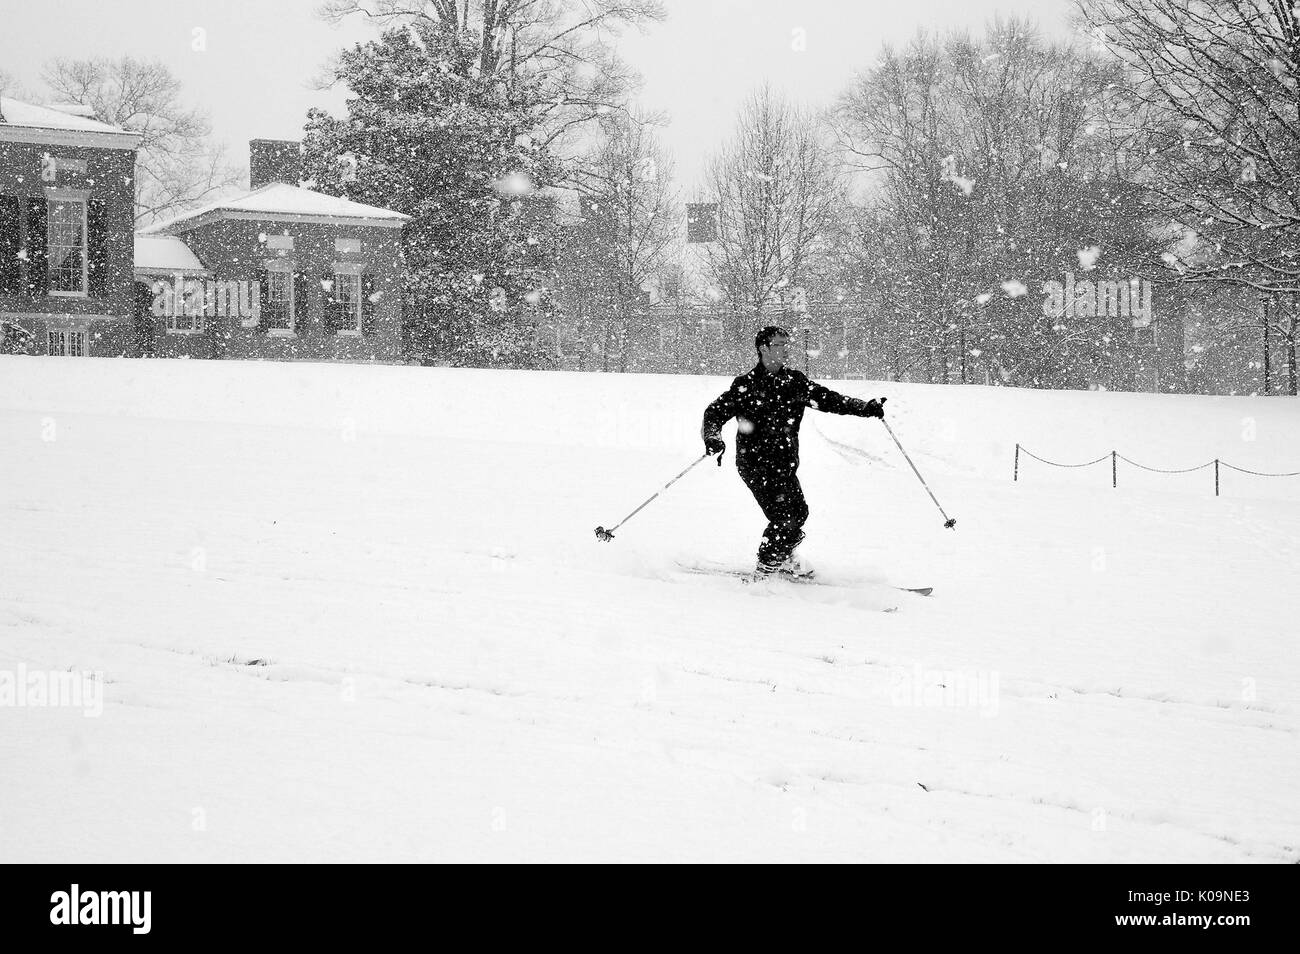 A college student skis down a path as snow falls, by the east entrance to the Homewood campus of the Johns Hopkins University in Baltimore, Maryland, 2015. Courtesy Eric Chen. Stock Photo